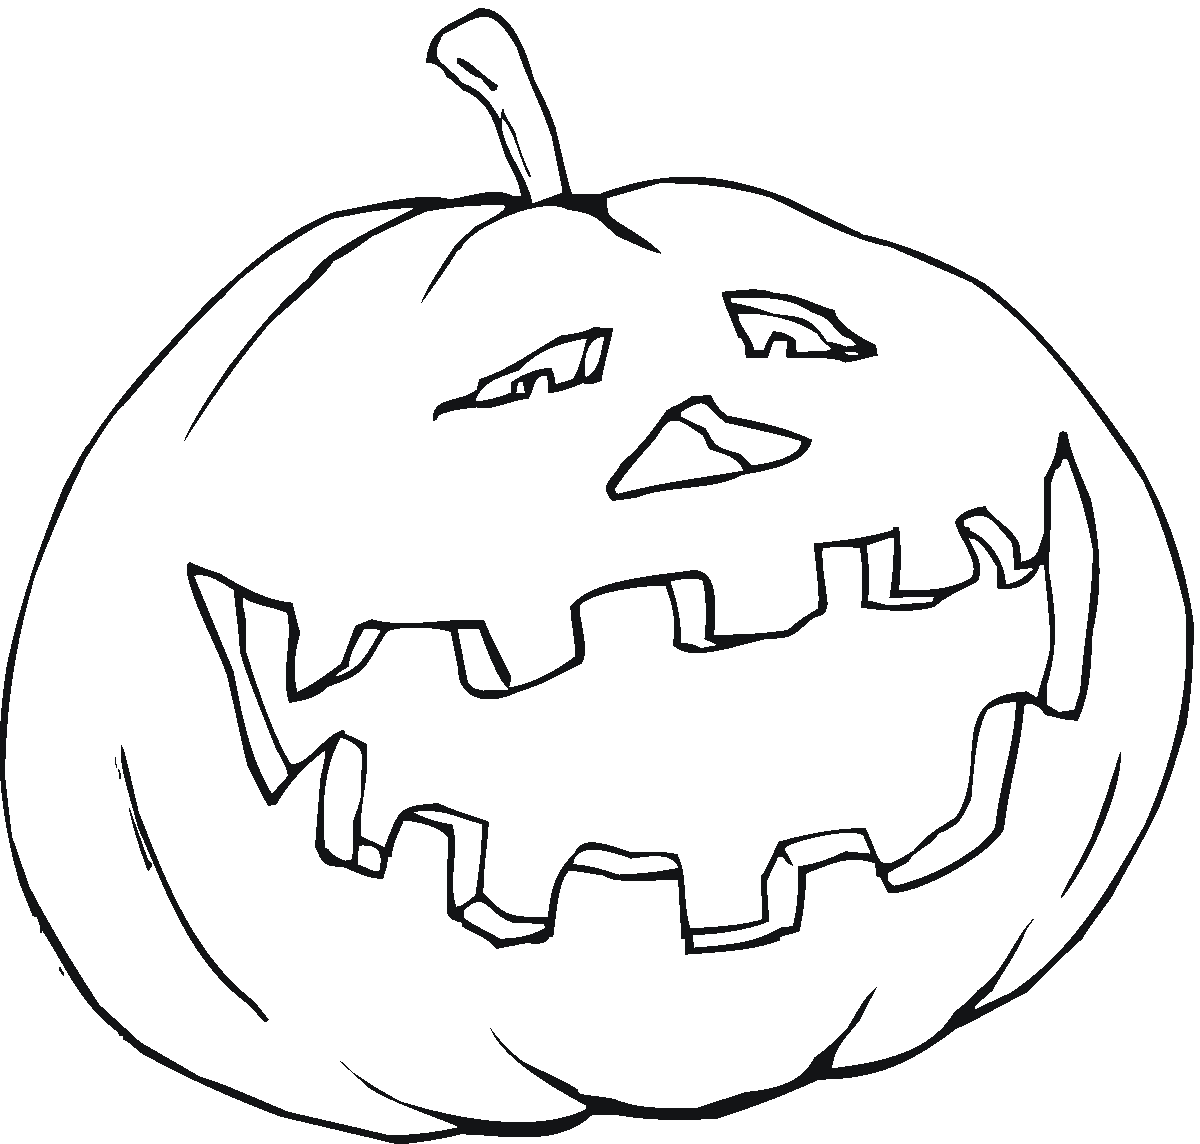 pumpkin coloring page learn and grow designs website how to draw a pumpkin coloring page pumpkin 